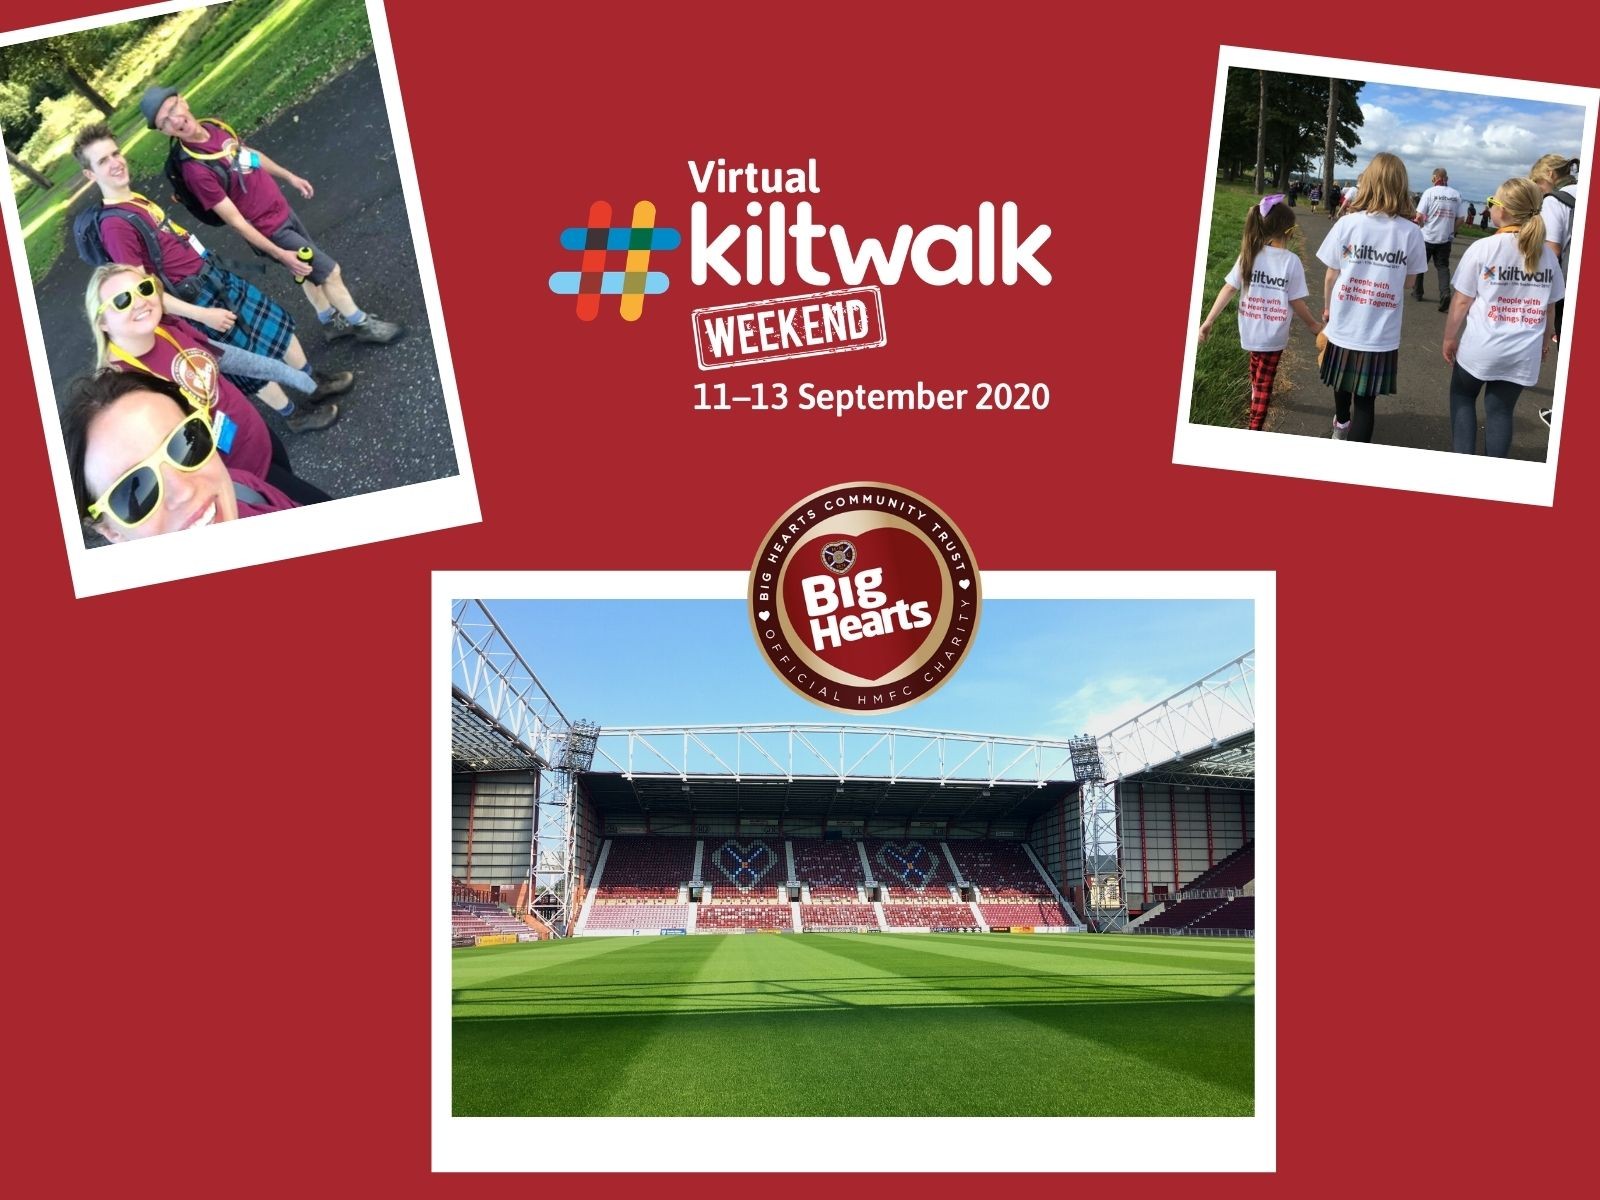  » 1 month to go: All the details about our Big Hearts Kiltwalk 2020!